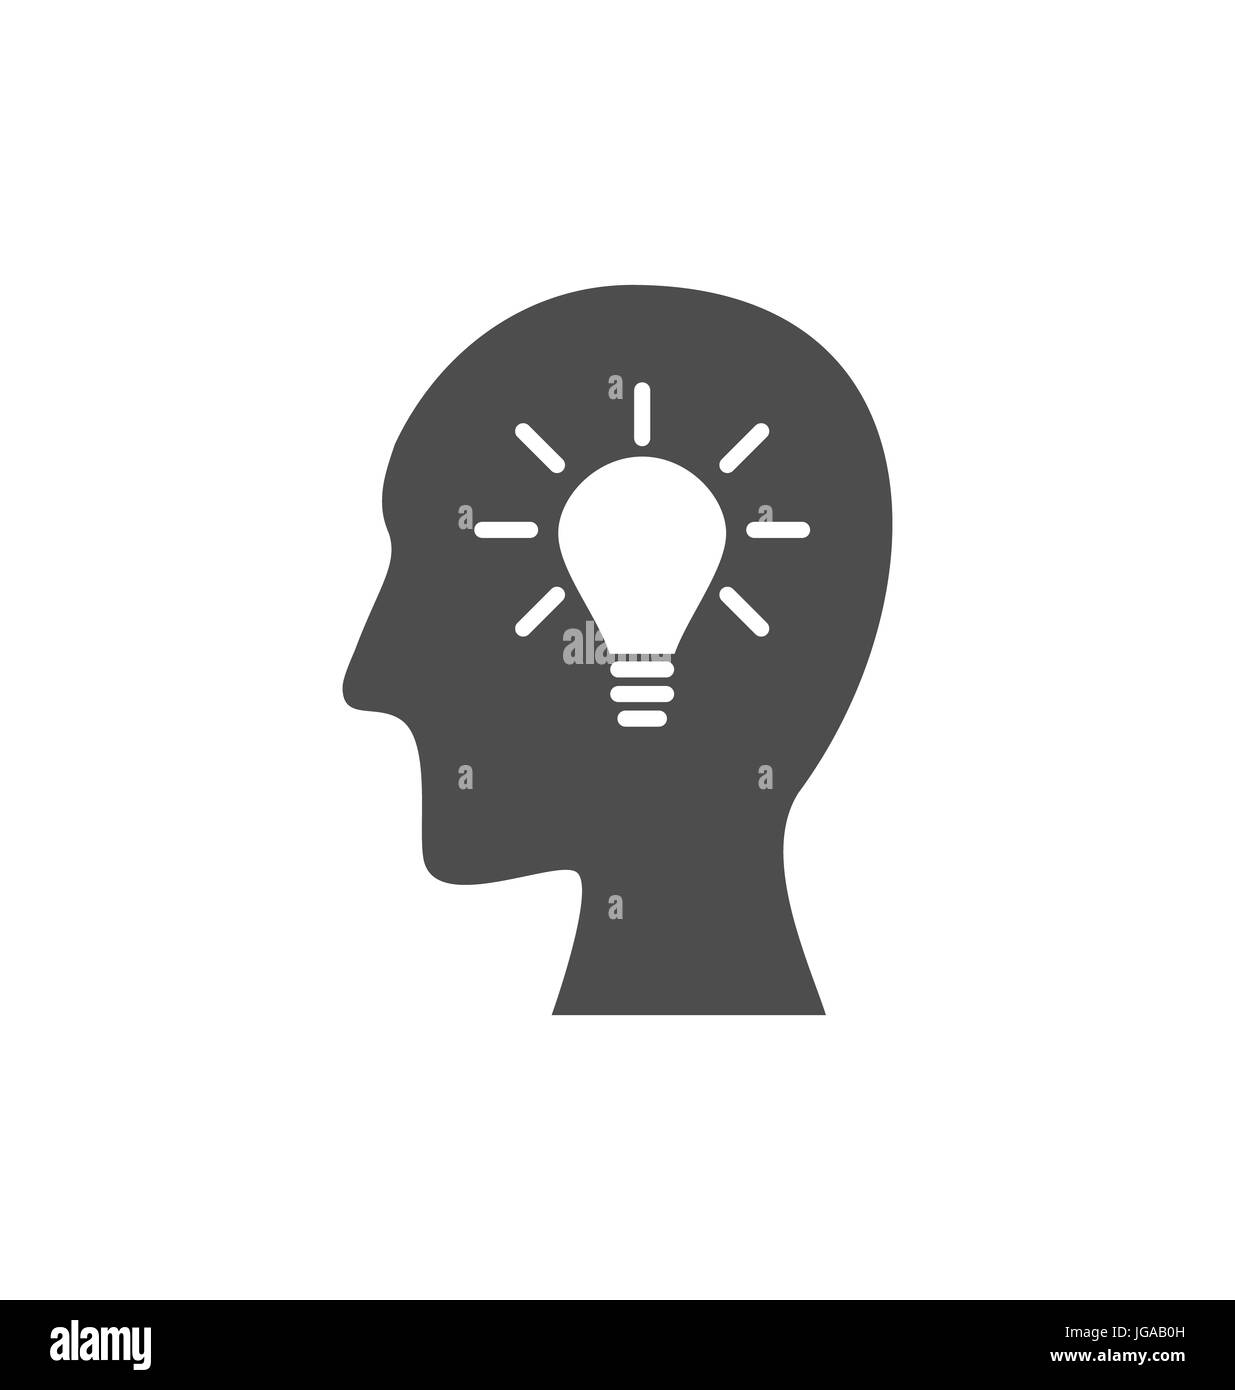 Icon process of generating ideas to solve problems, birth of the brilliant ideas - Stock Photo